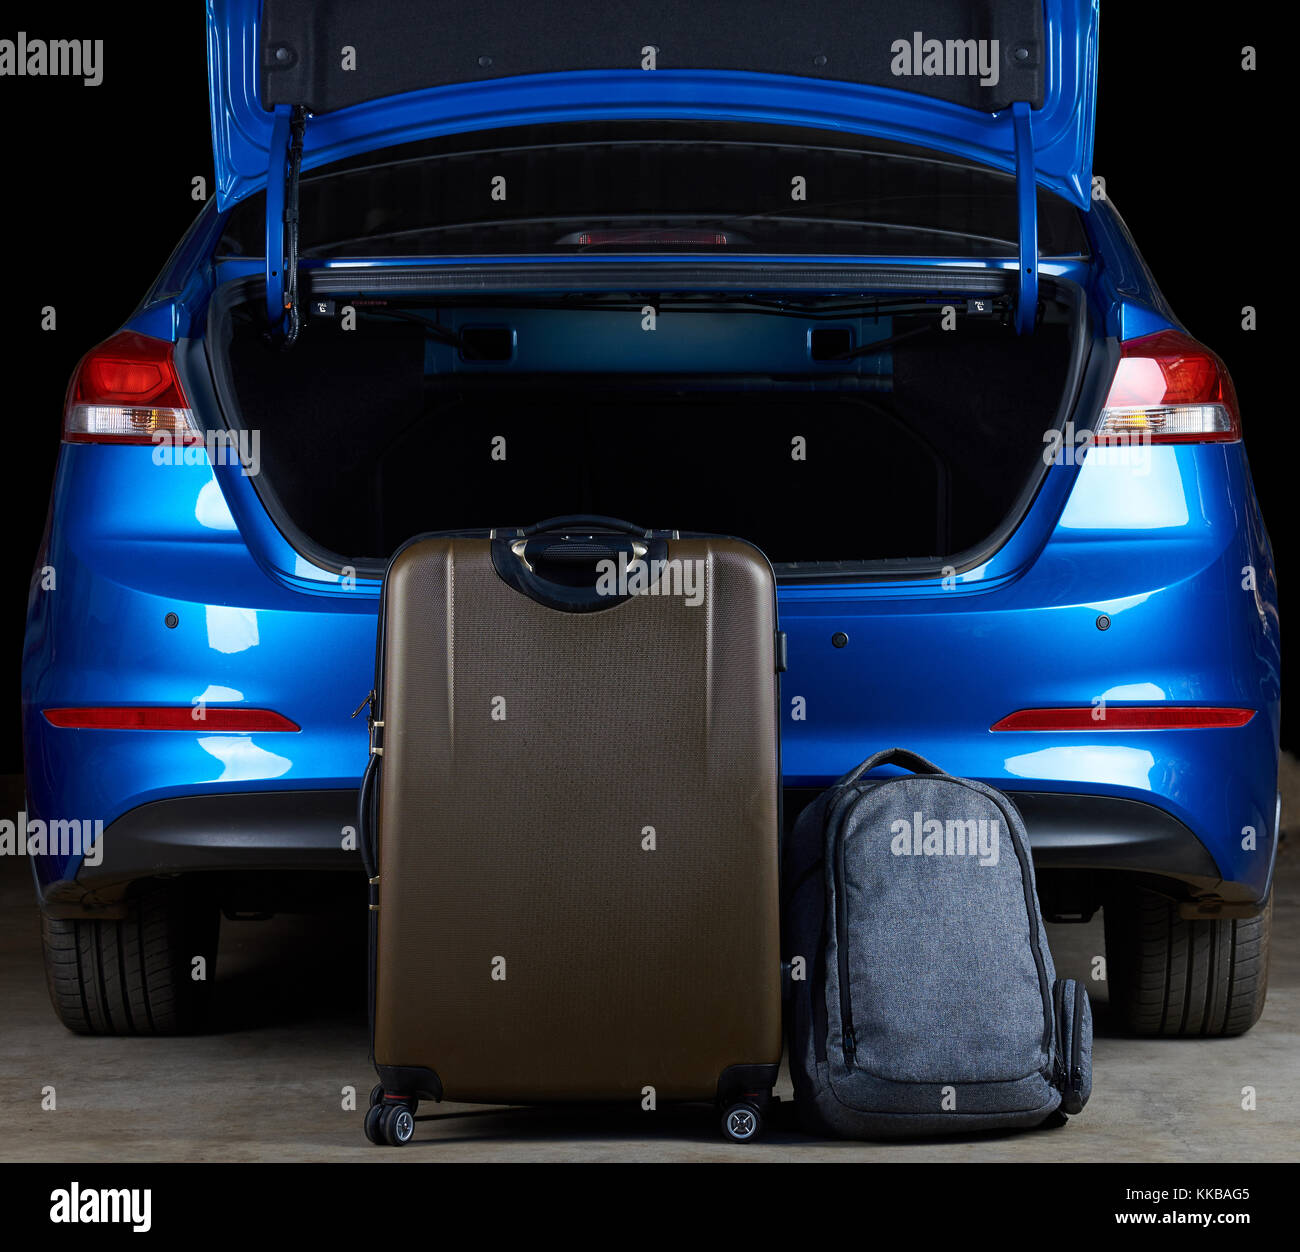 Filling modern car trunk with bags. Loading empty blue car trunk Stock Photo